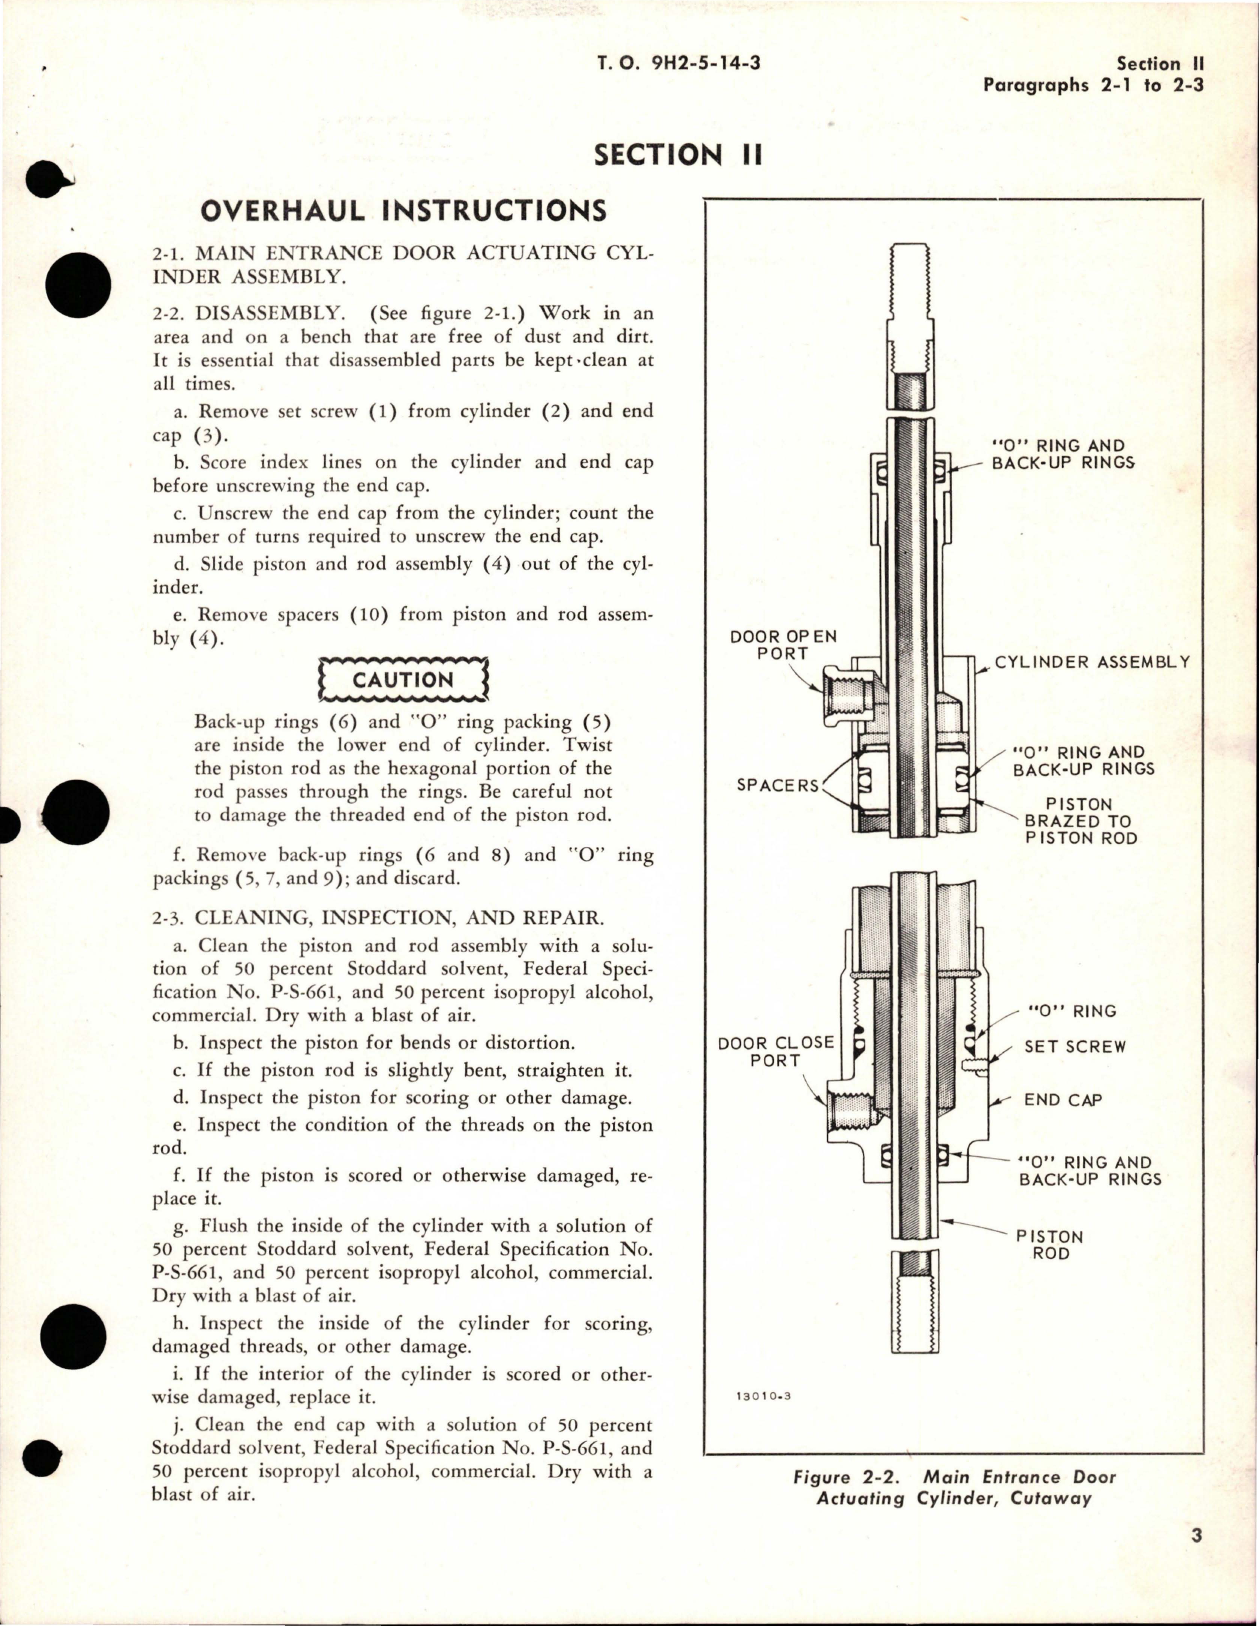 Sample page 5 from AirCorps Library document: Overhaul Instructions for Main Entrance Door Actuating Cylinder - Part 240-3111672-0